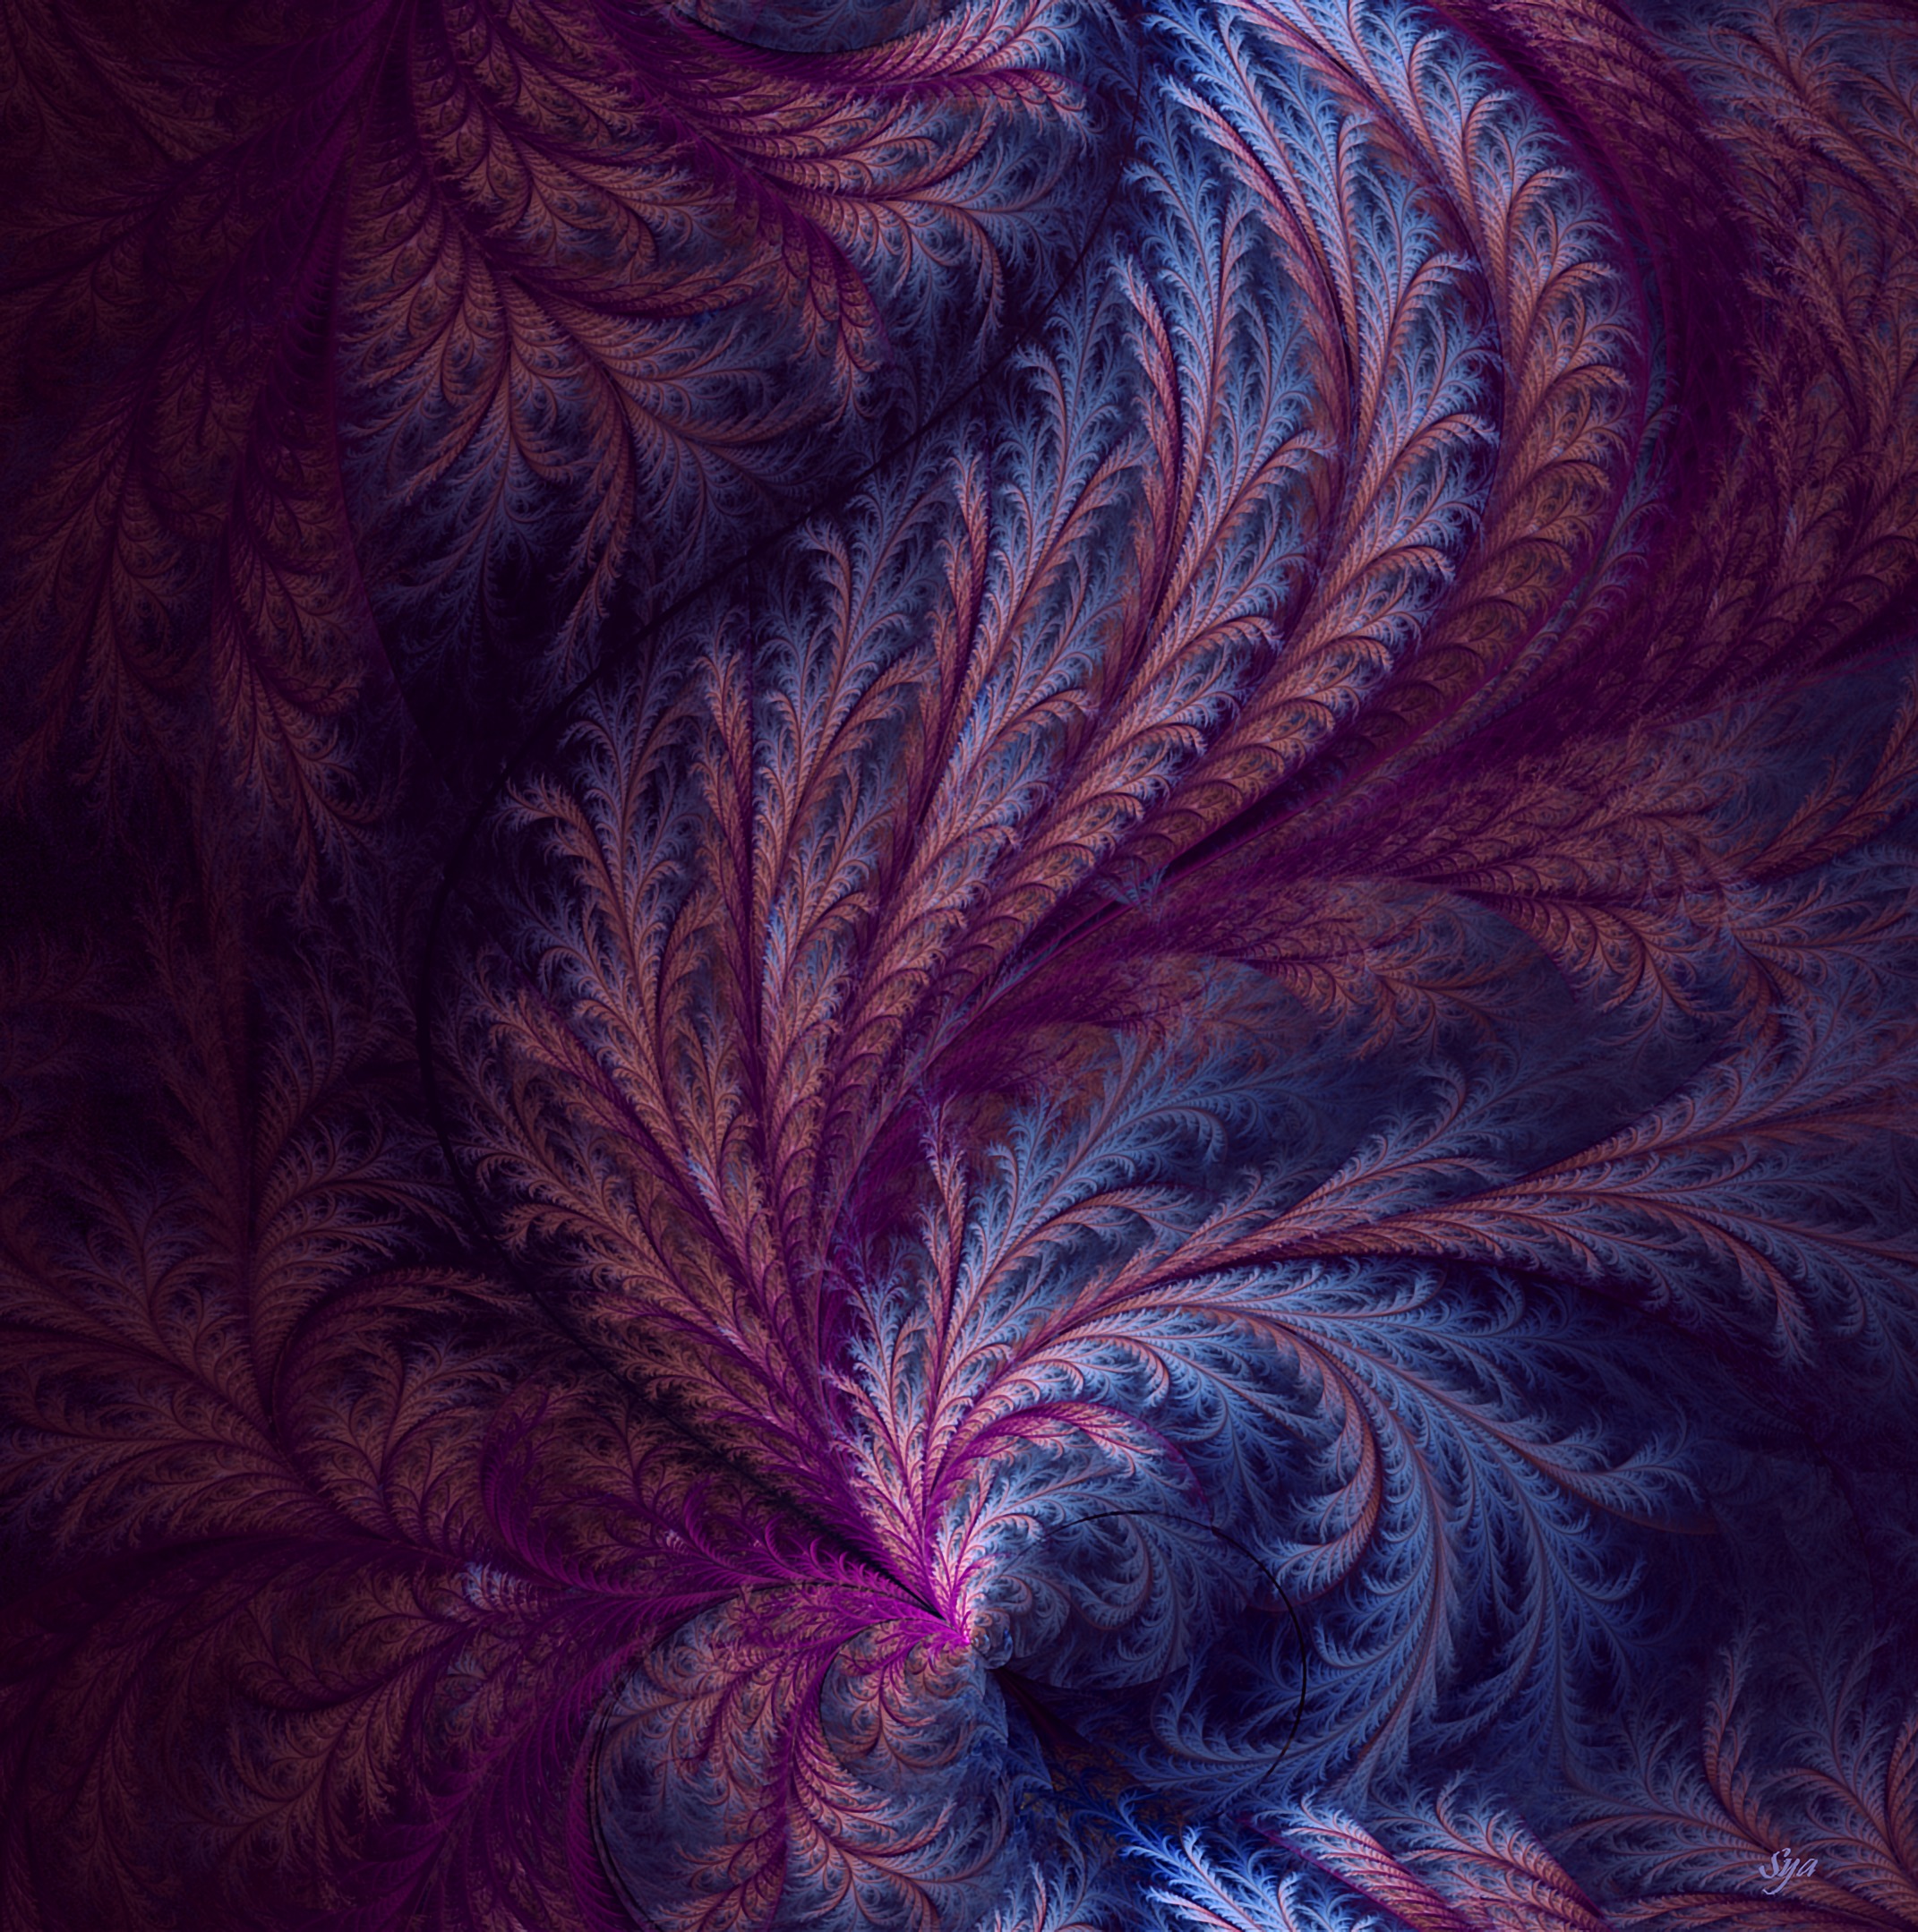 Cool Backgrounds branchy, abstract, intricate, pattern Fractal